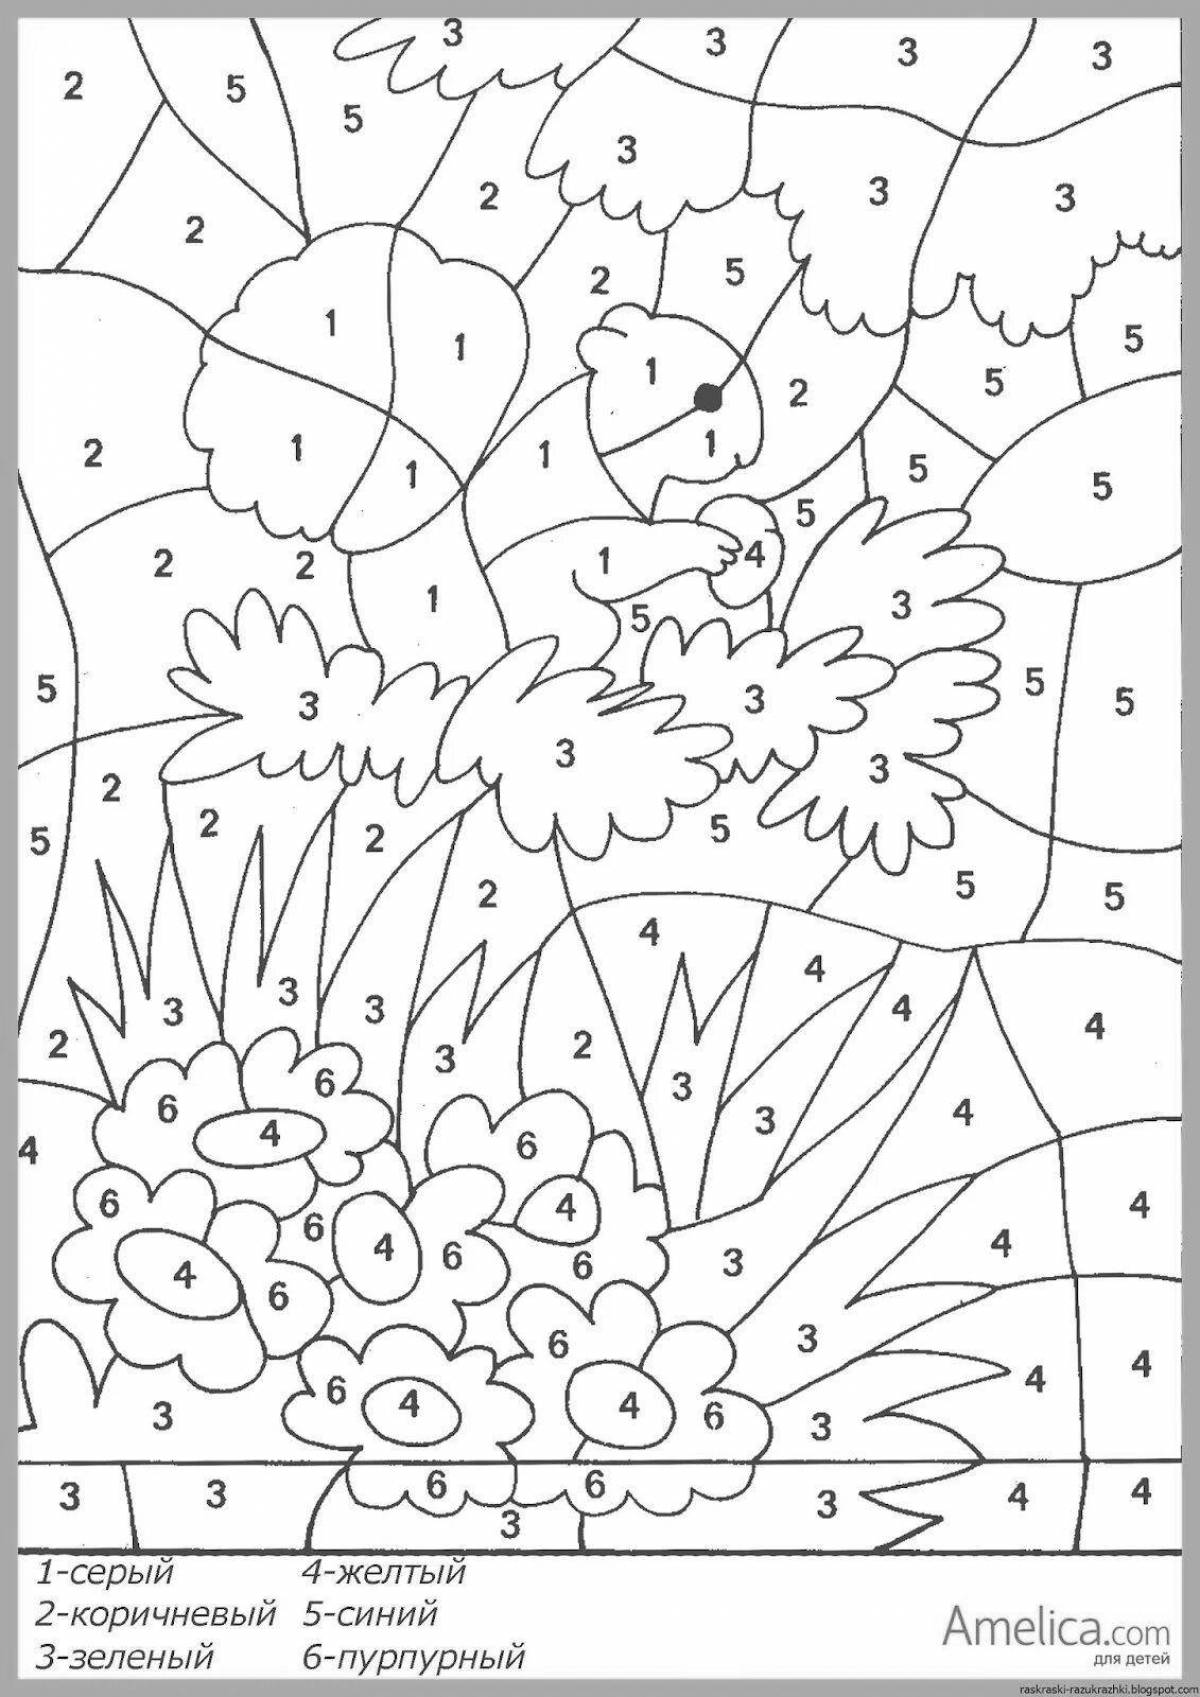 Fun coloring by phone numbers